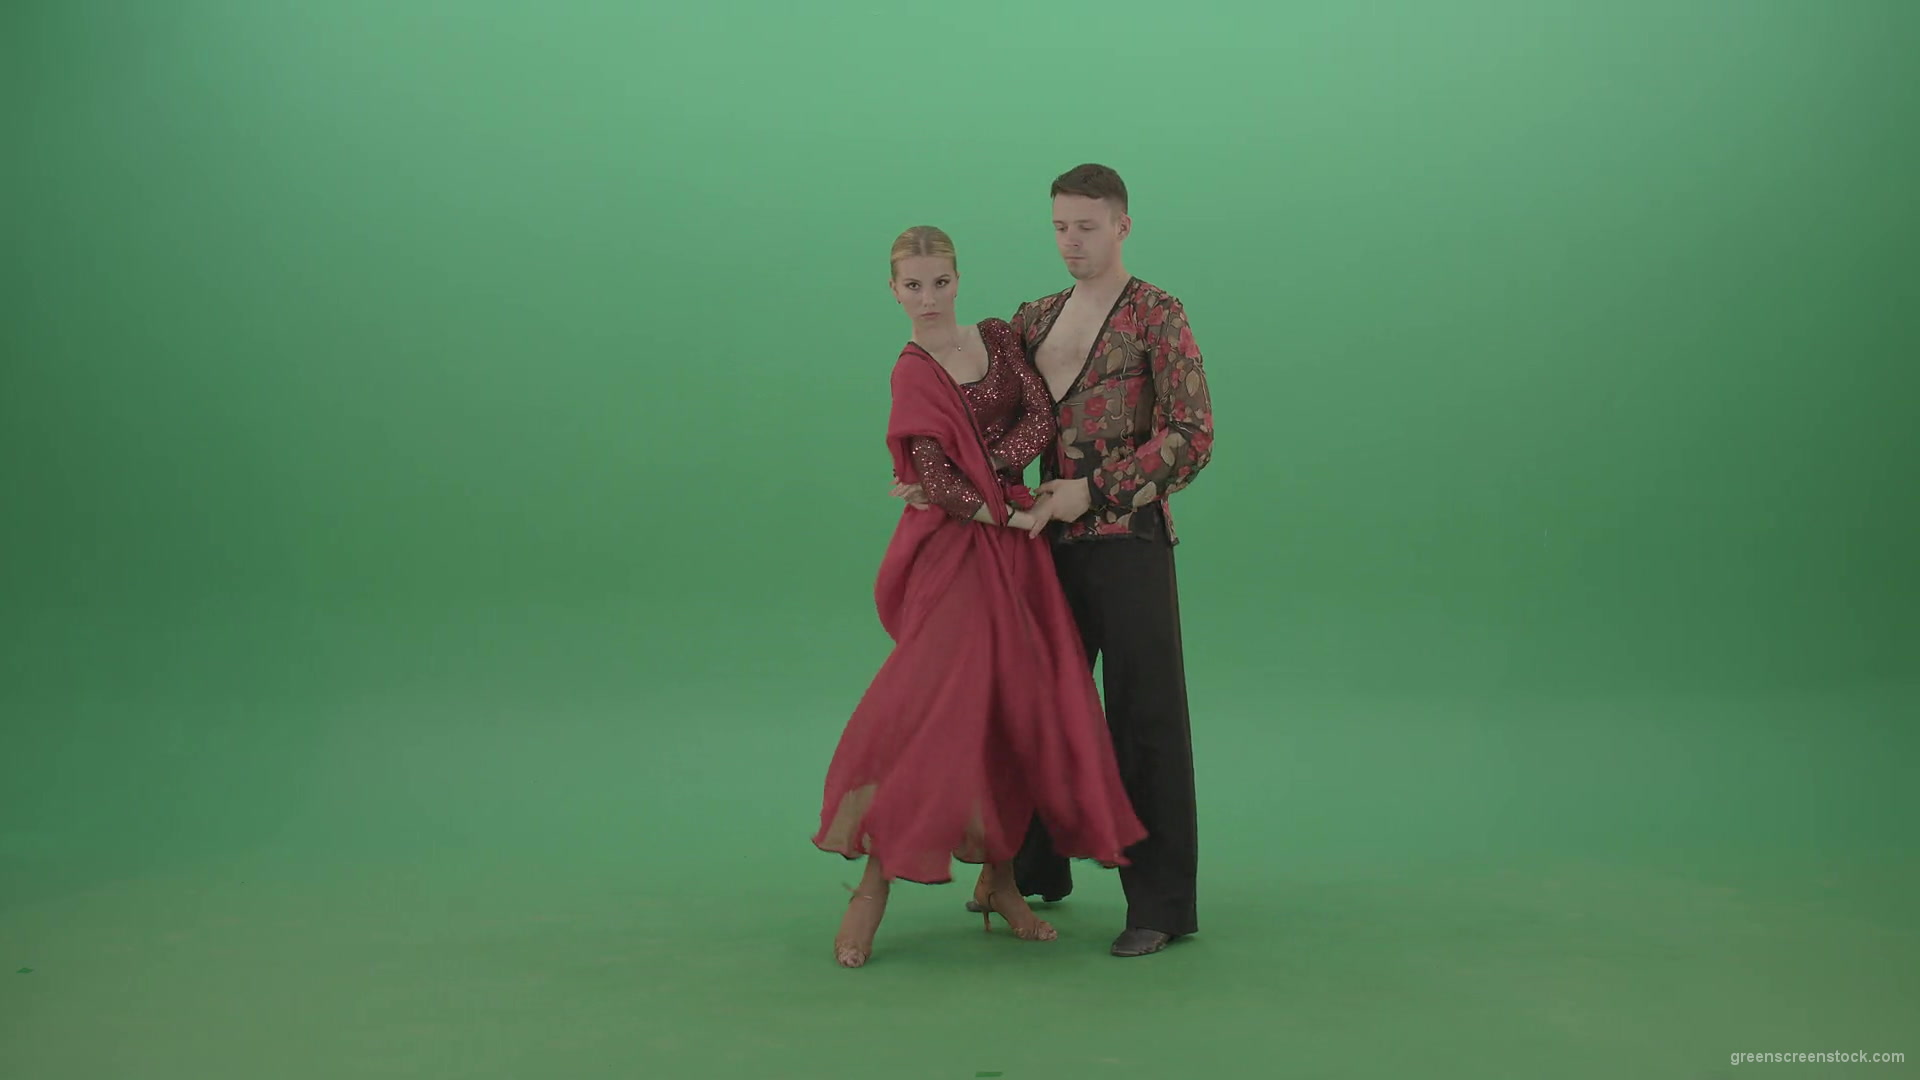 Passion-Couple-dancing-Rumba-Ballroom-dance-and-clapping-in-hands-isolated-on-green-screen-4K-Video-Footage-1920_009 Green Screen Stock